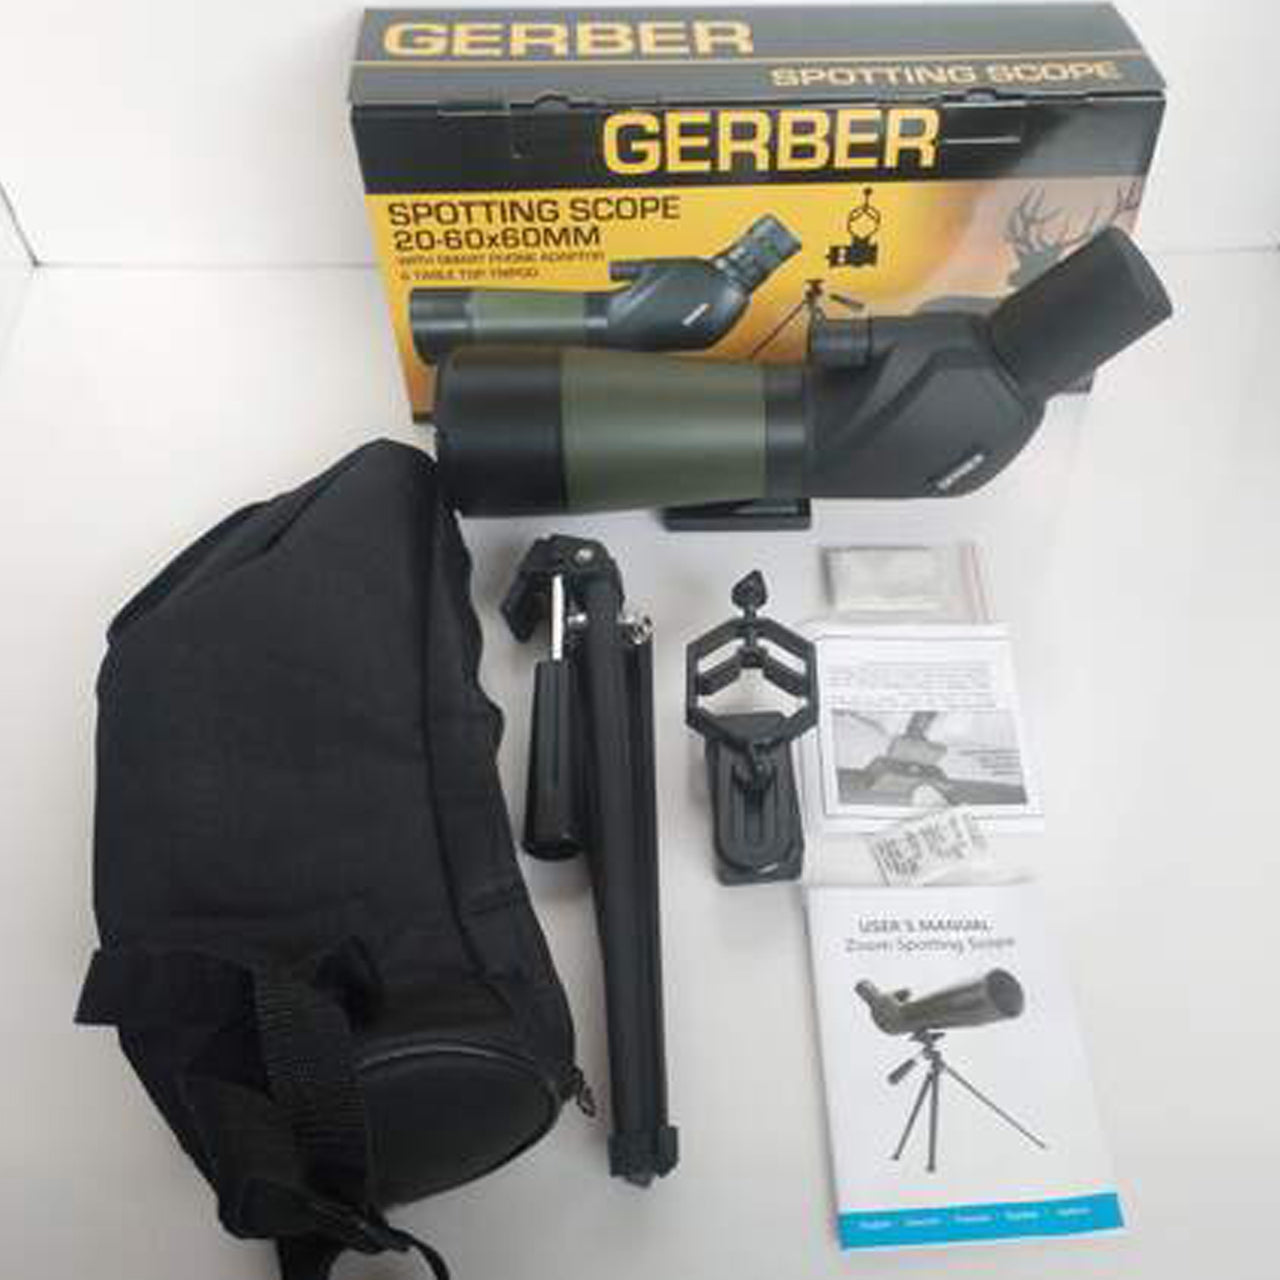 The GERBER 20-60x60mm is one of the most unique spotting scopes in the market. Economical and compact, it offers high magnifications in a 45 degree eyepiece&nbsp;design. The rubber armoured exterior is both, attractive and durable. The mini table-top tripod collapses flat for easy storage. A smooth focus provides crystal clear viewing, and the included carry case stores &amp; protects the Scope when not in use. www.defenceqstore.com.au